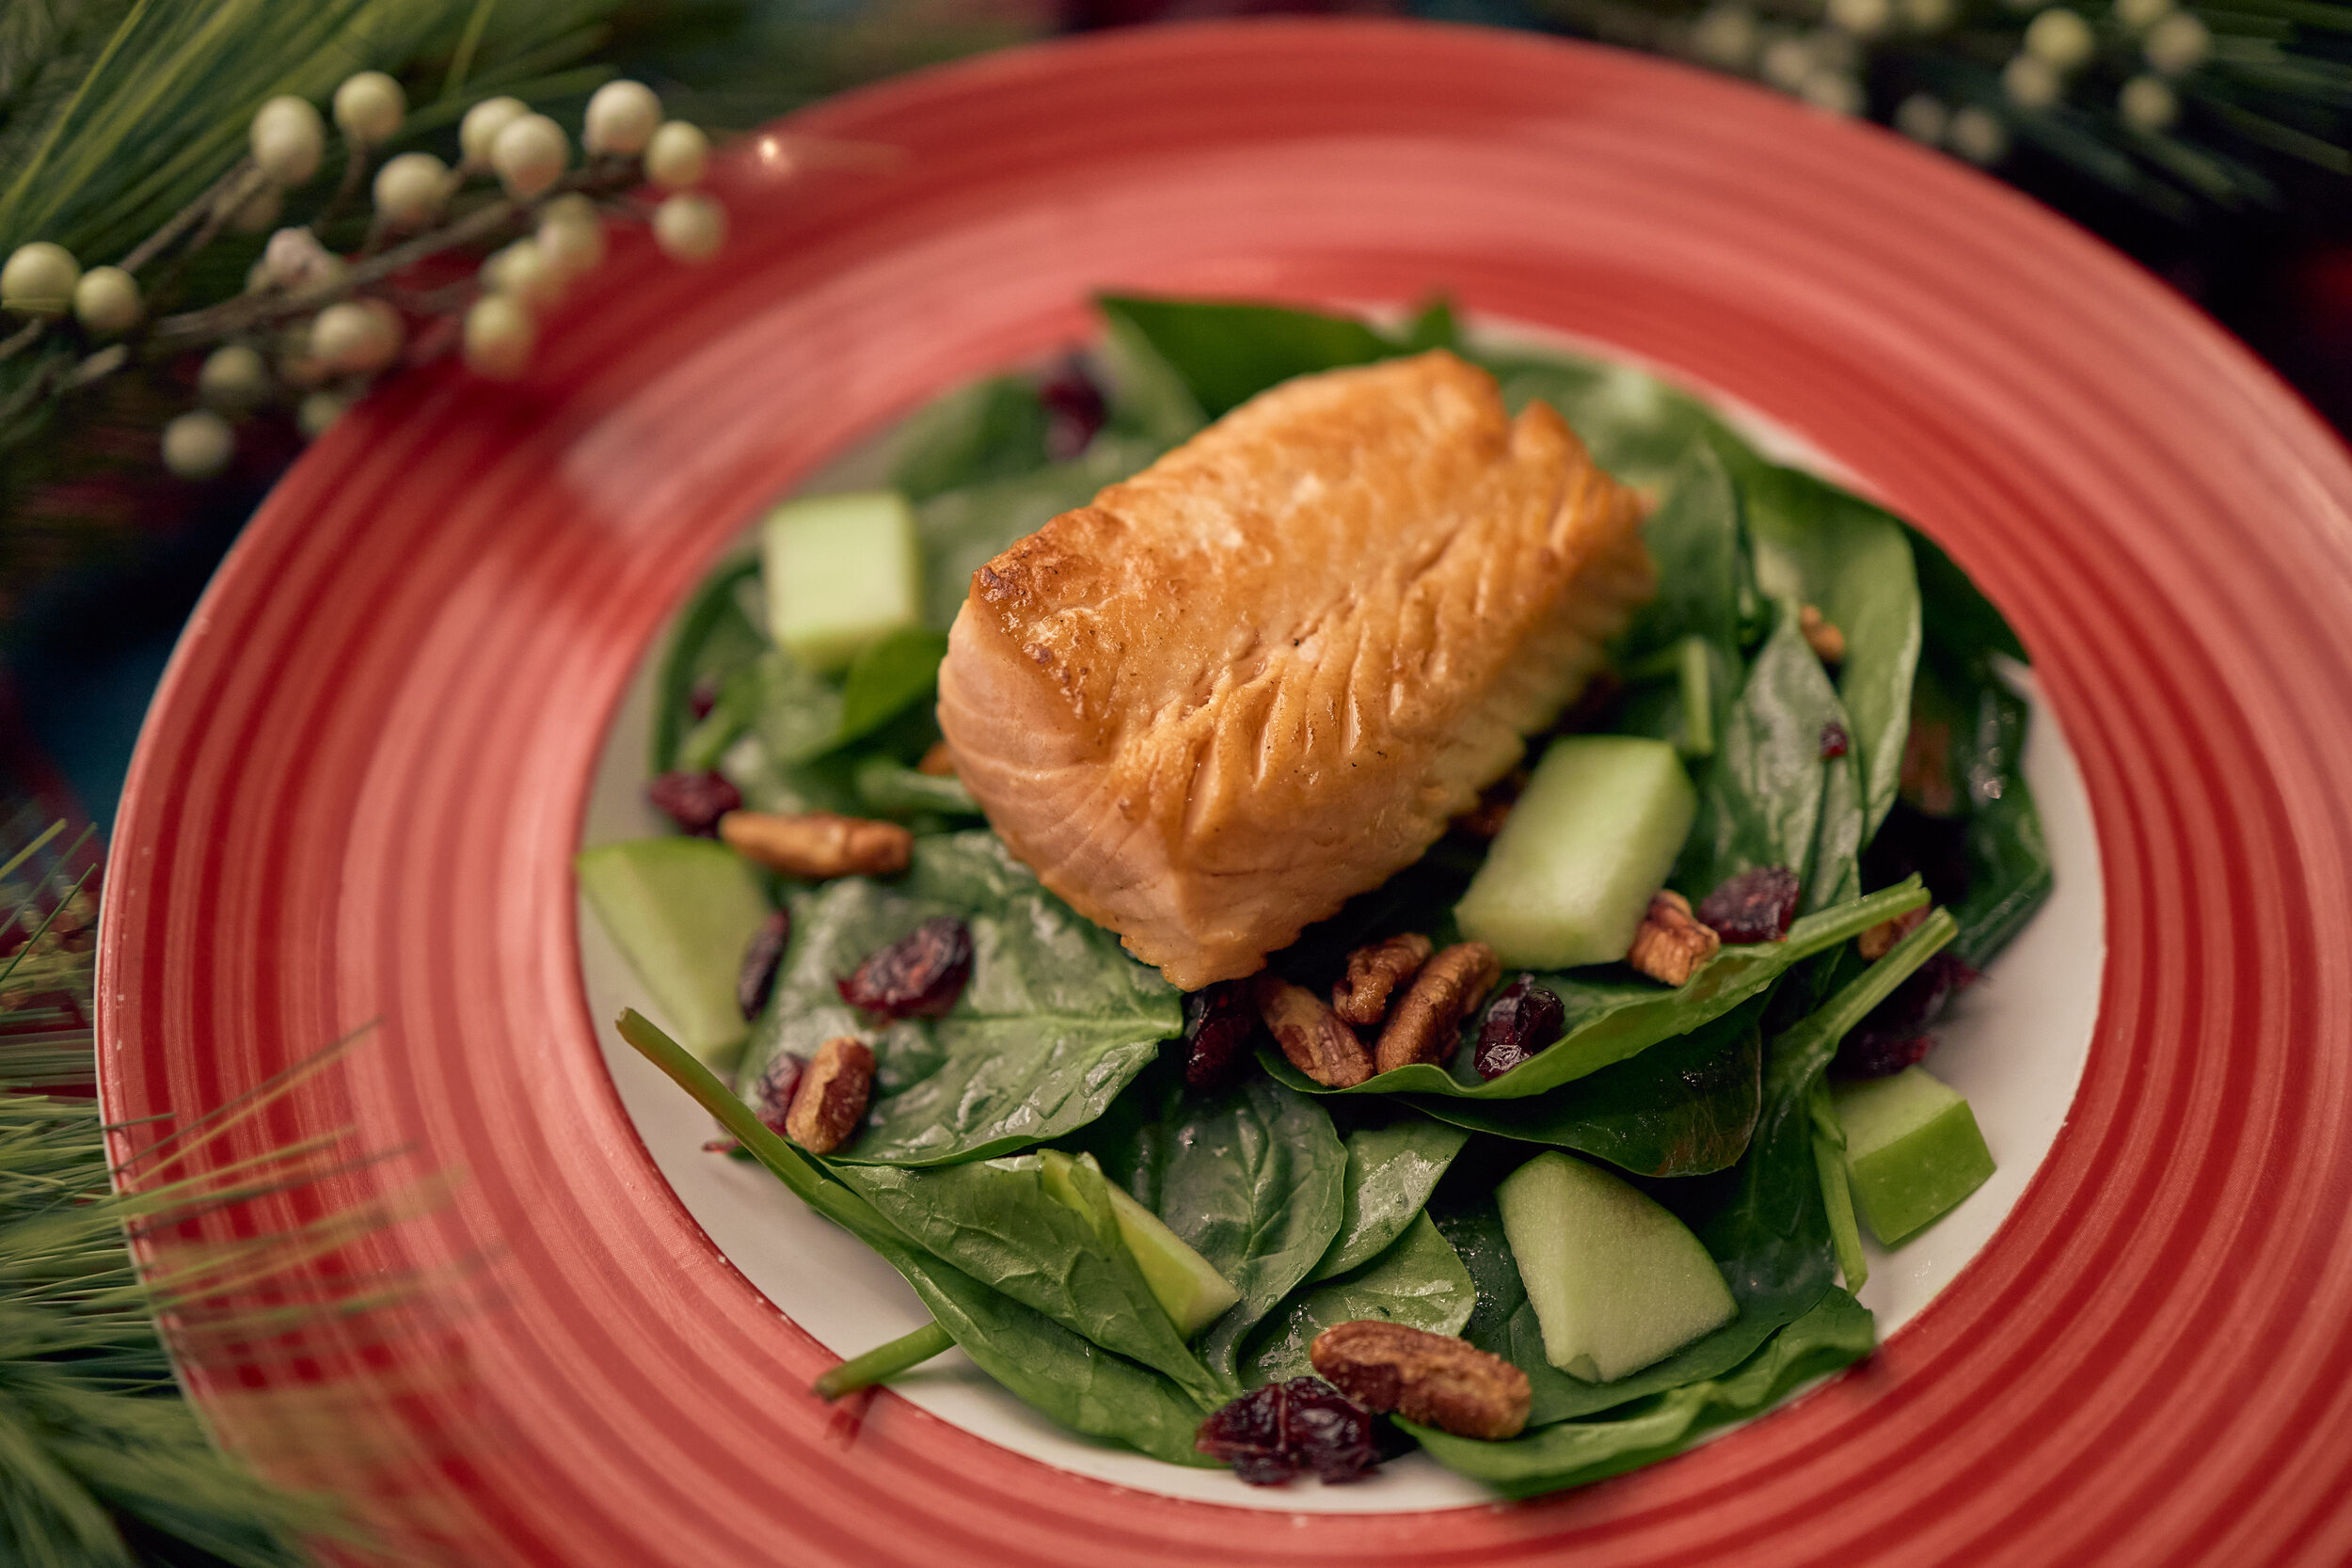 Cold Salmon Winter Salad – Spinach, Apples, Pecans, Cranberries, and a Raspberry Vinaigrette